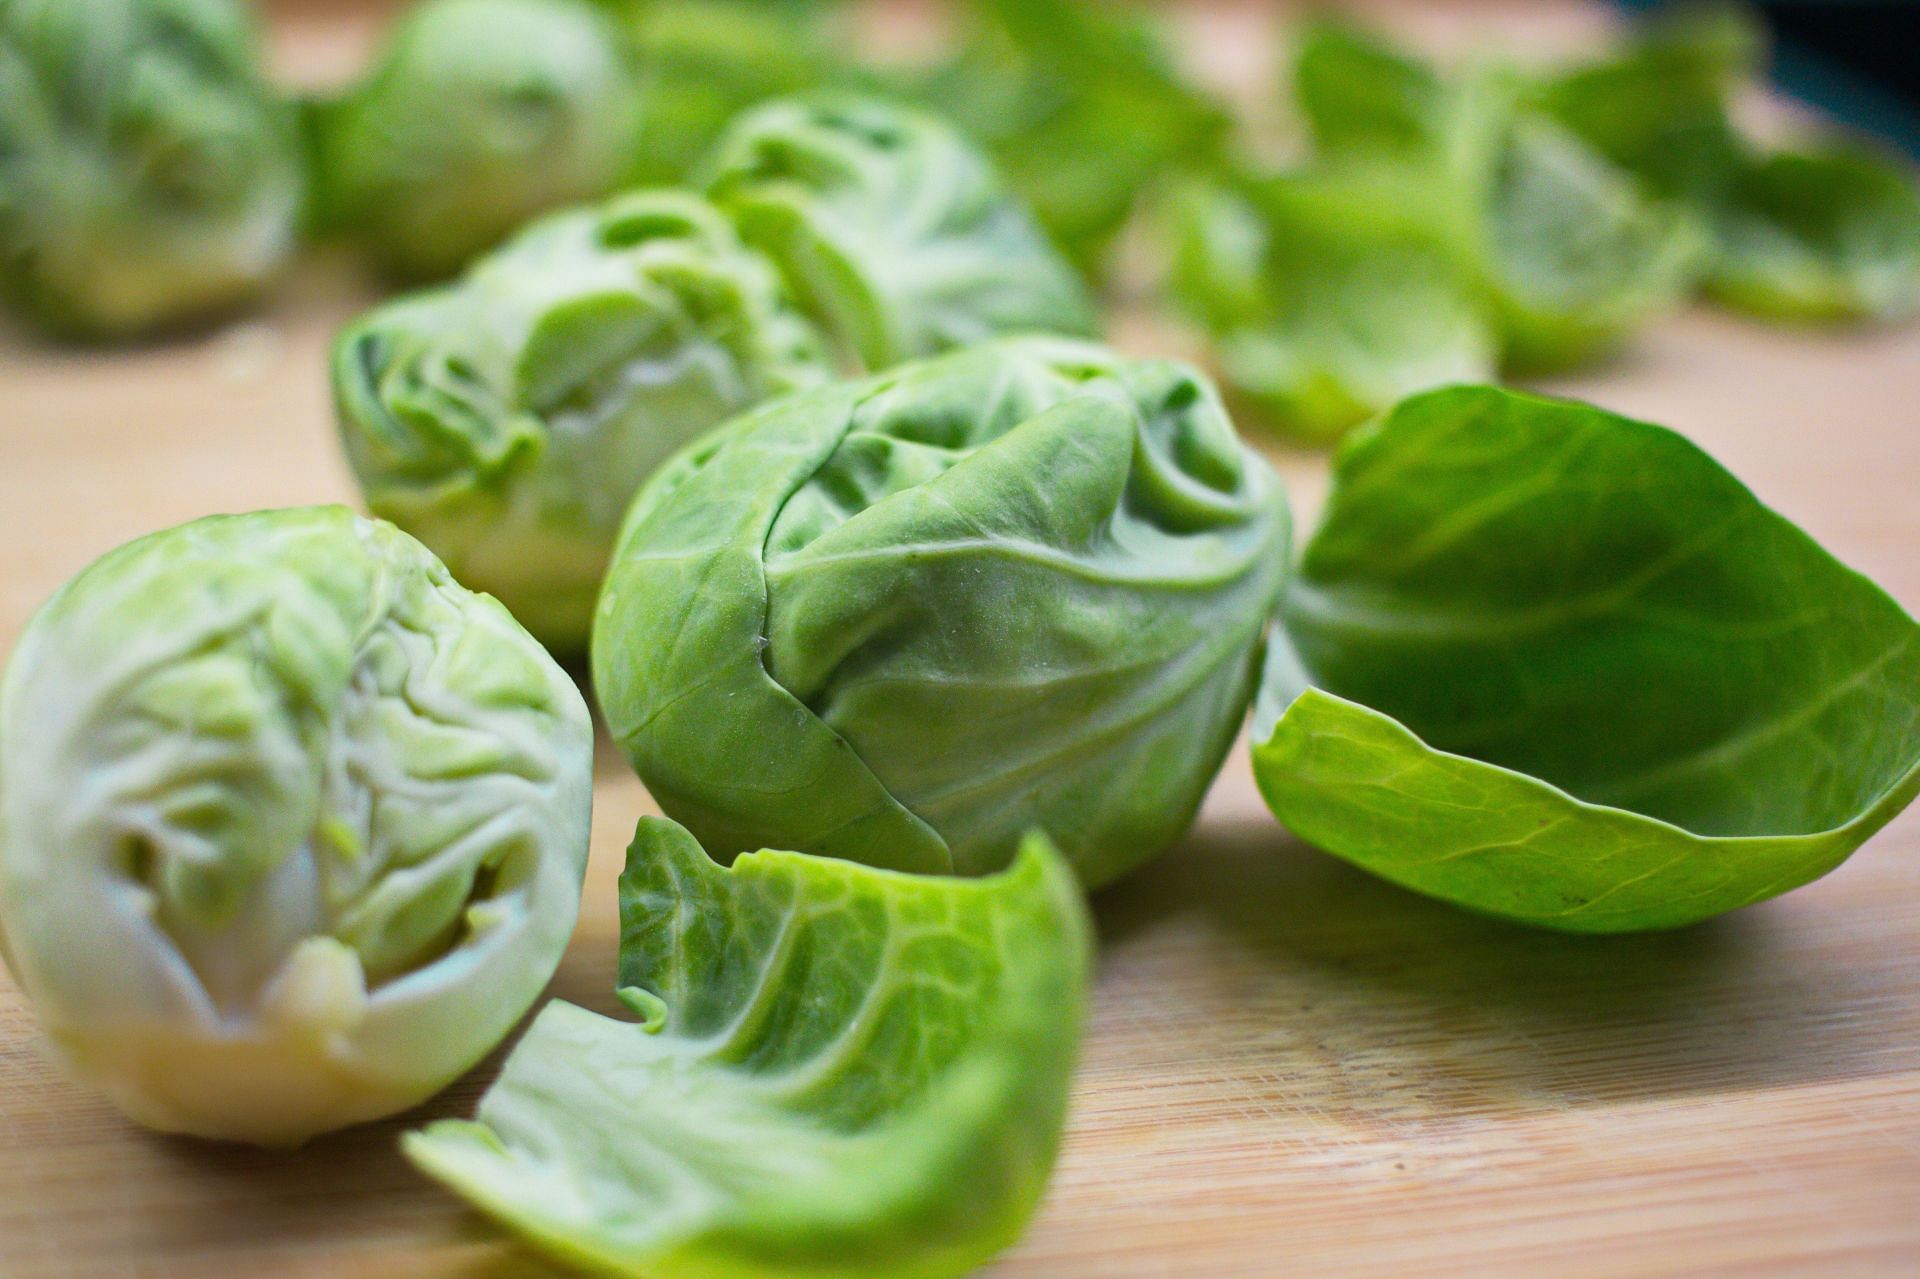 Brussels sprouts are small, round green vegetables that are a member of the cabbage family(Photo by Damir Mijailovic/pexel)